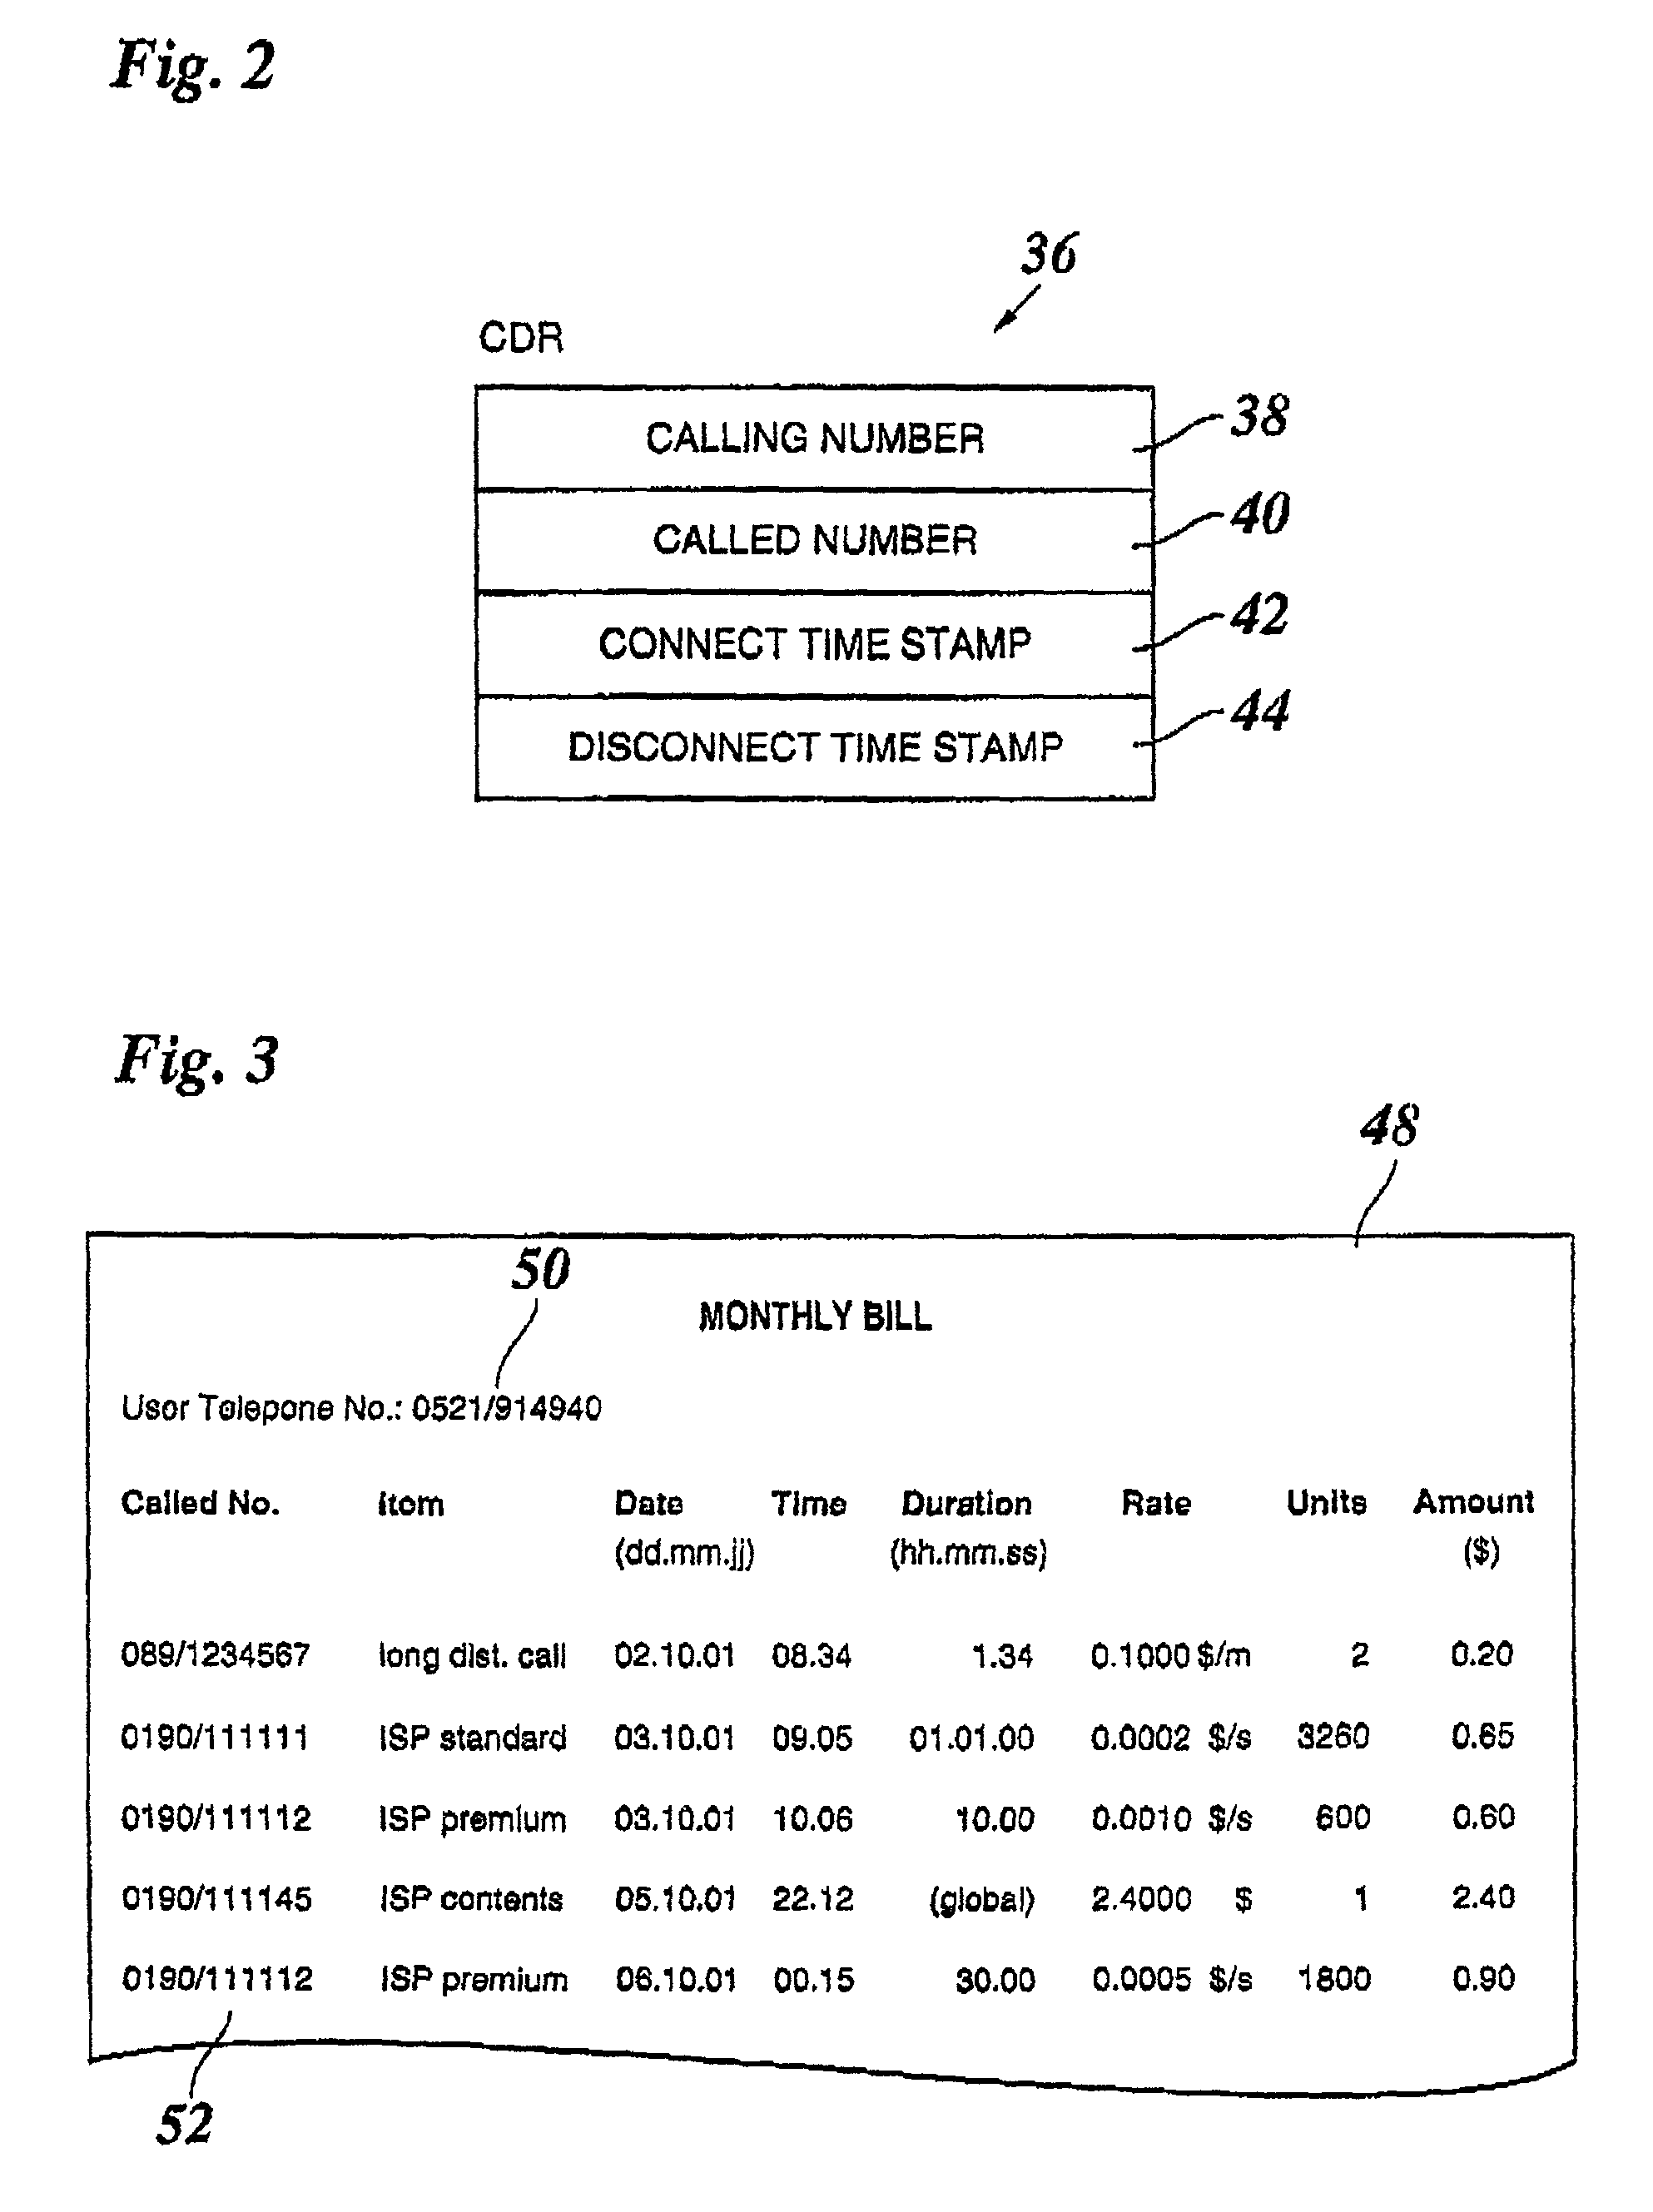 Method and system for providing and billing internet services